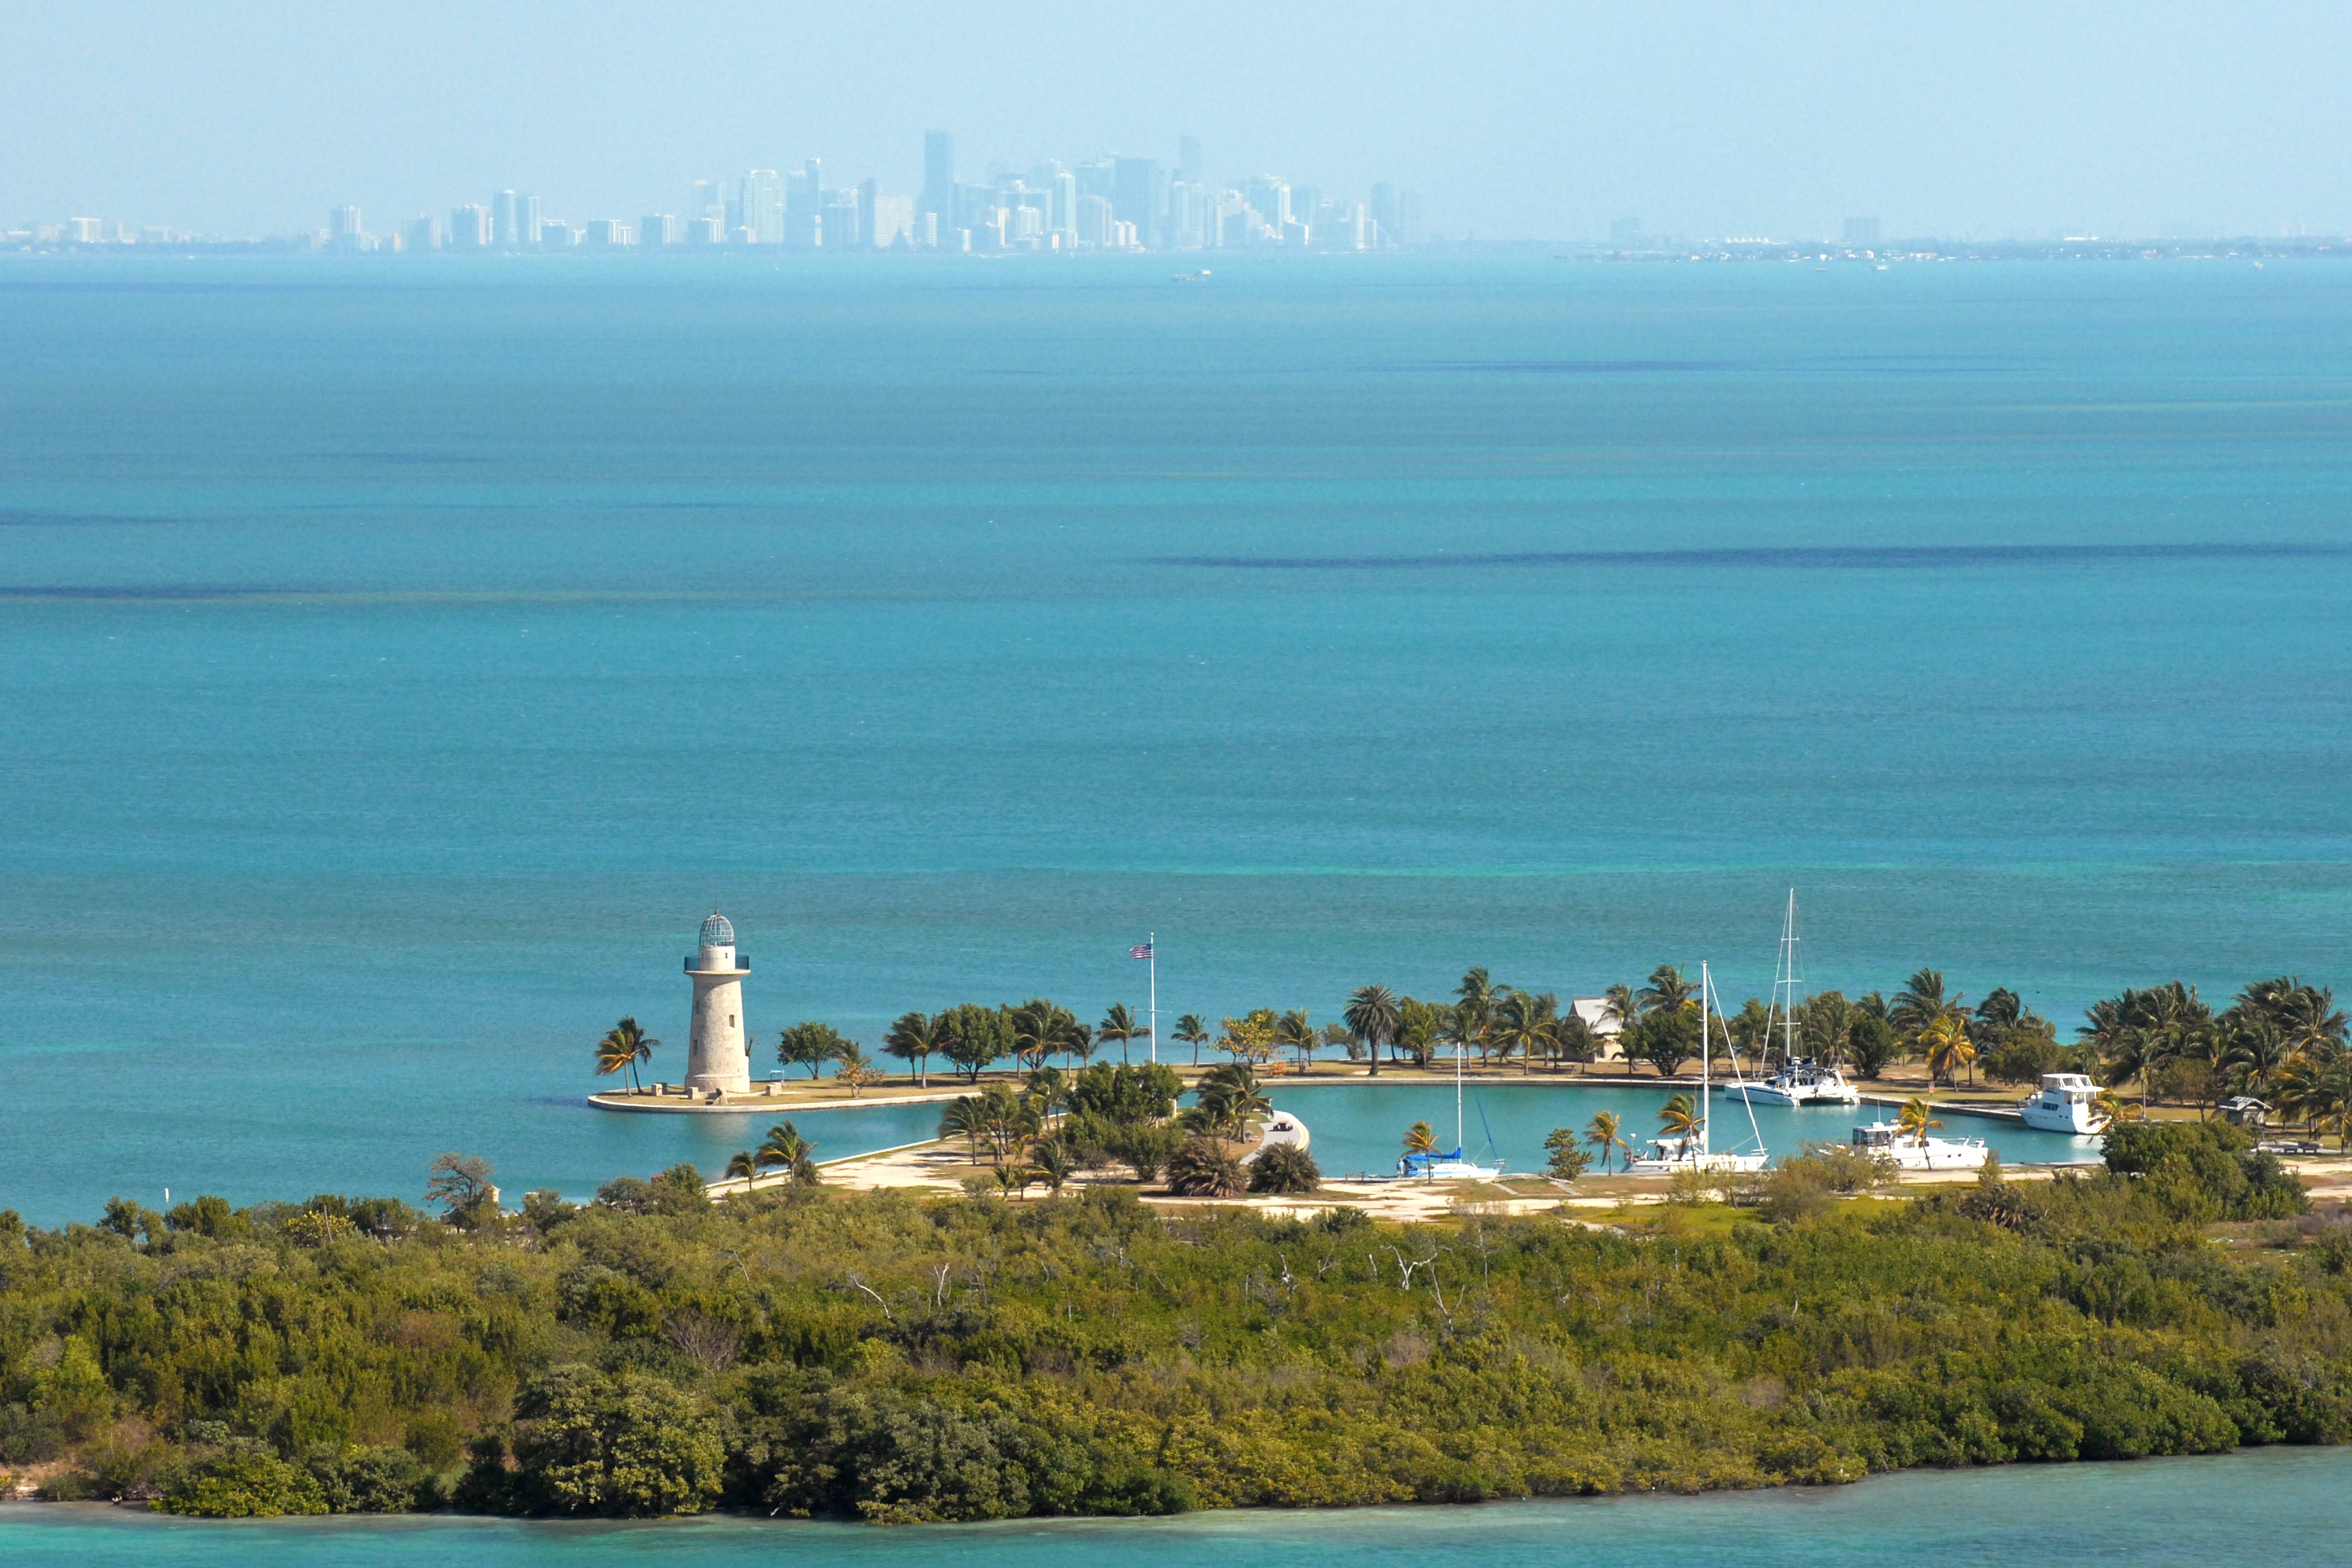 Downtown Miami in background.